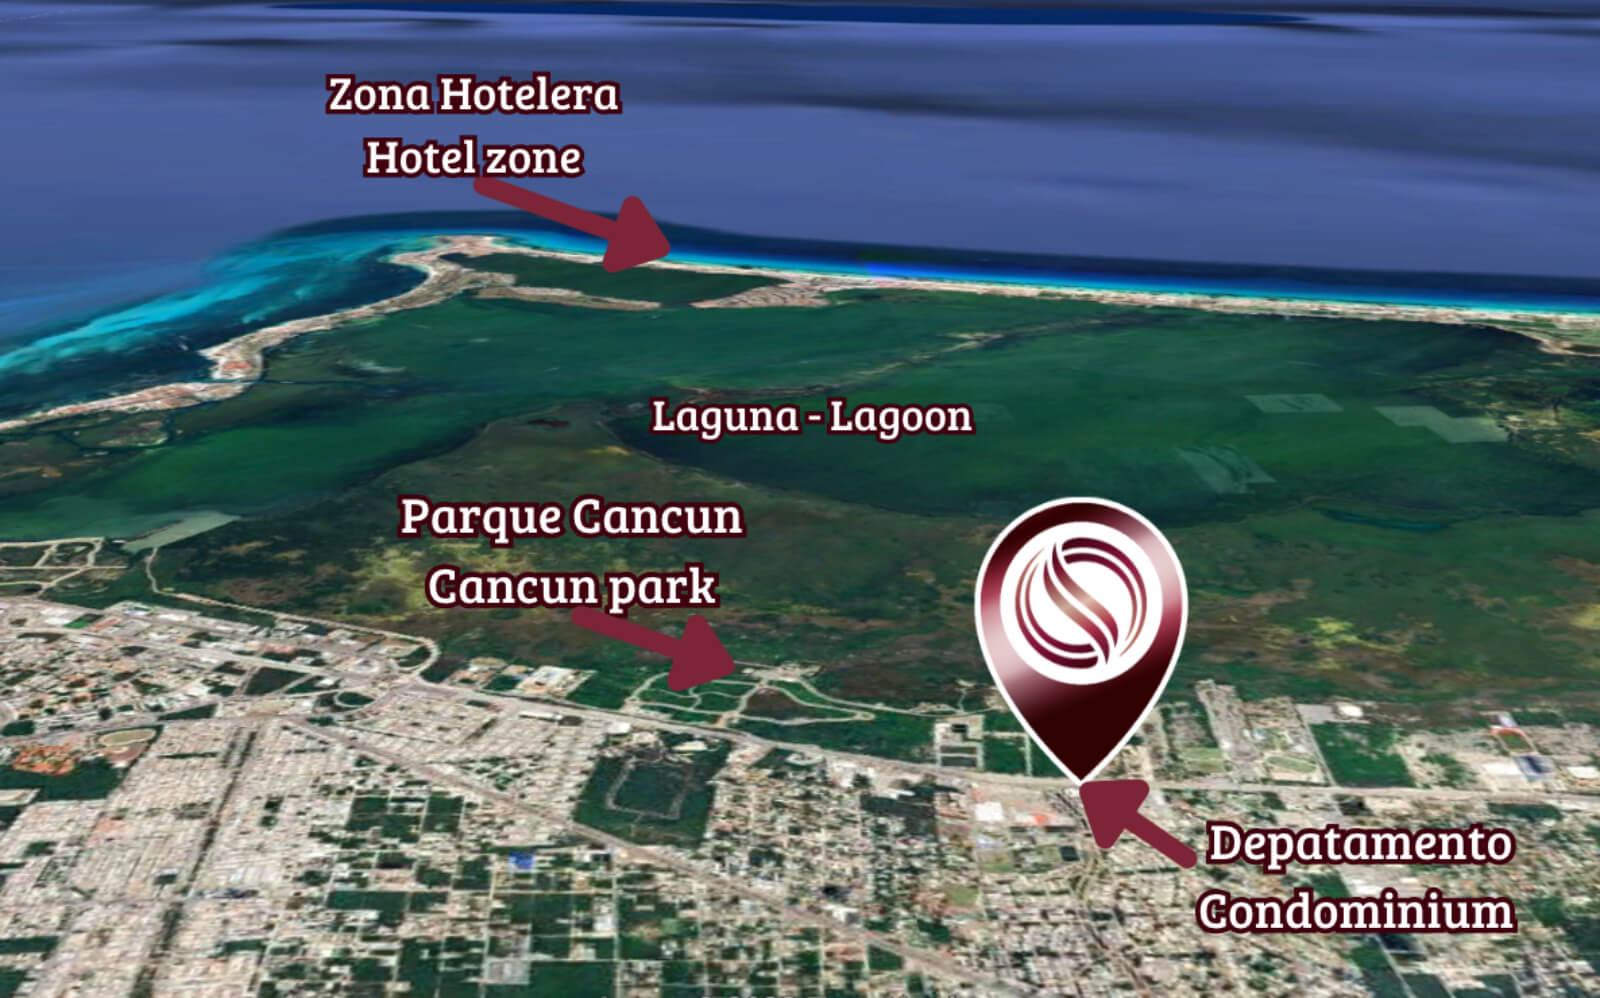 Luxury apartment, with resort-type amenities, for sale Cancun.